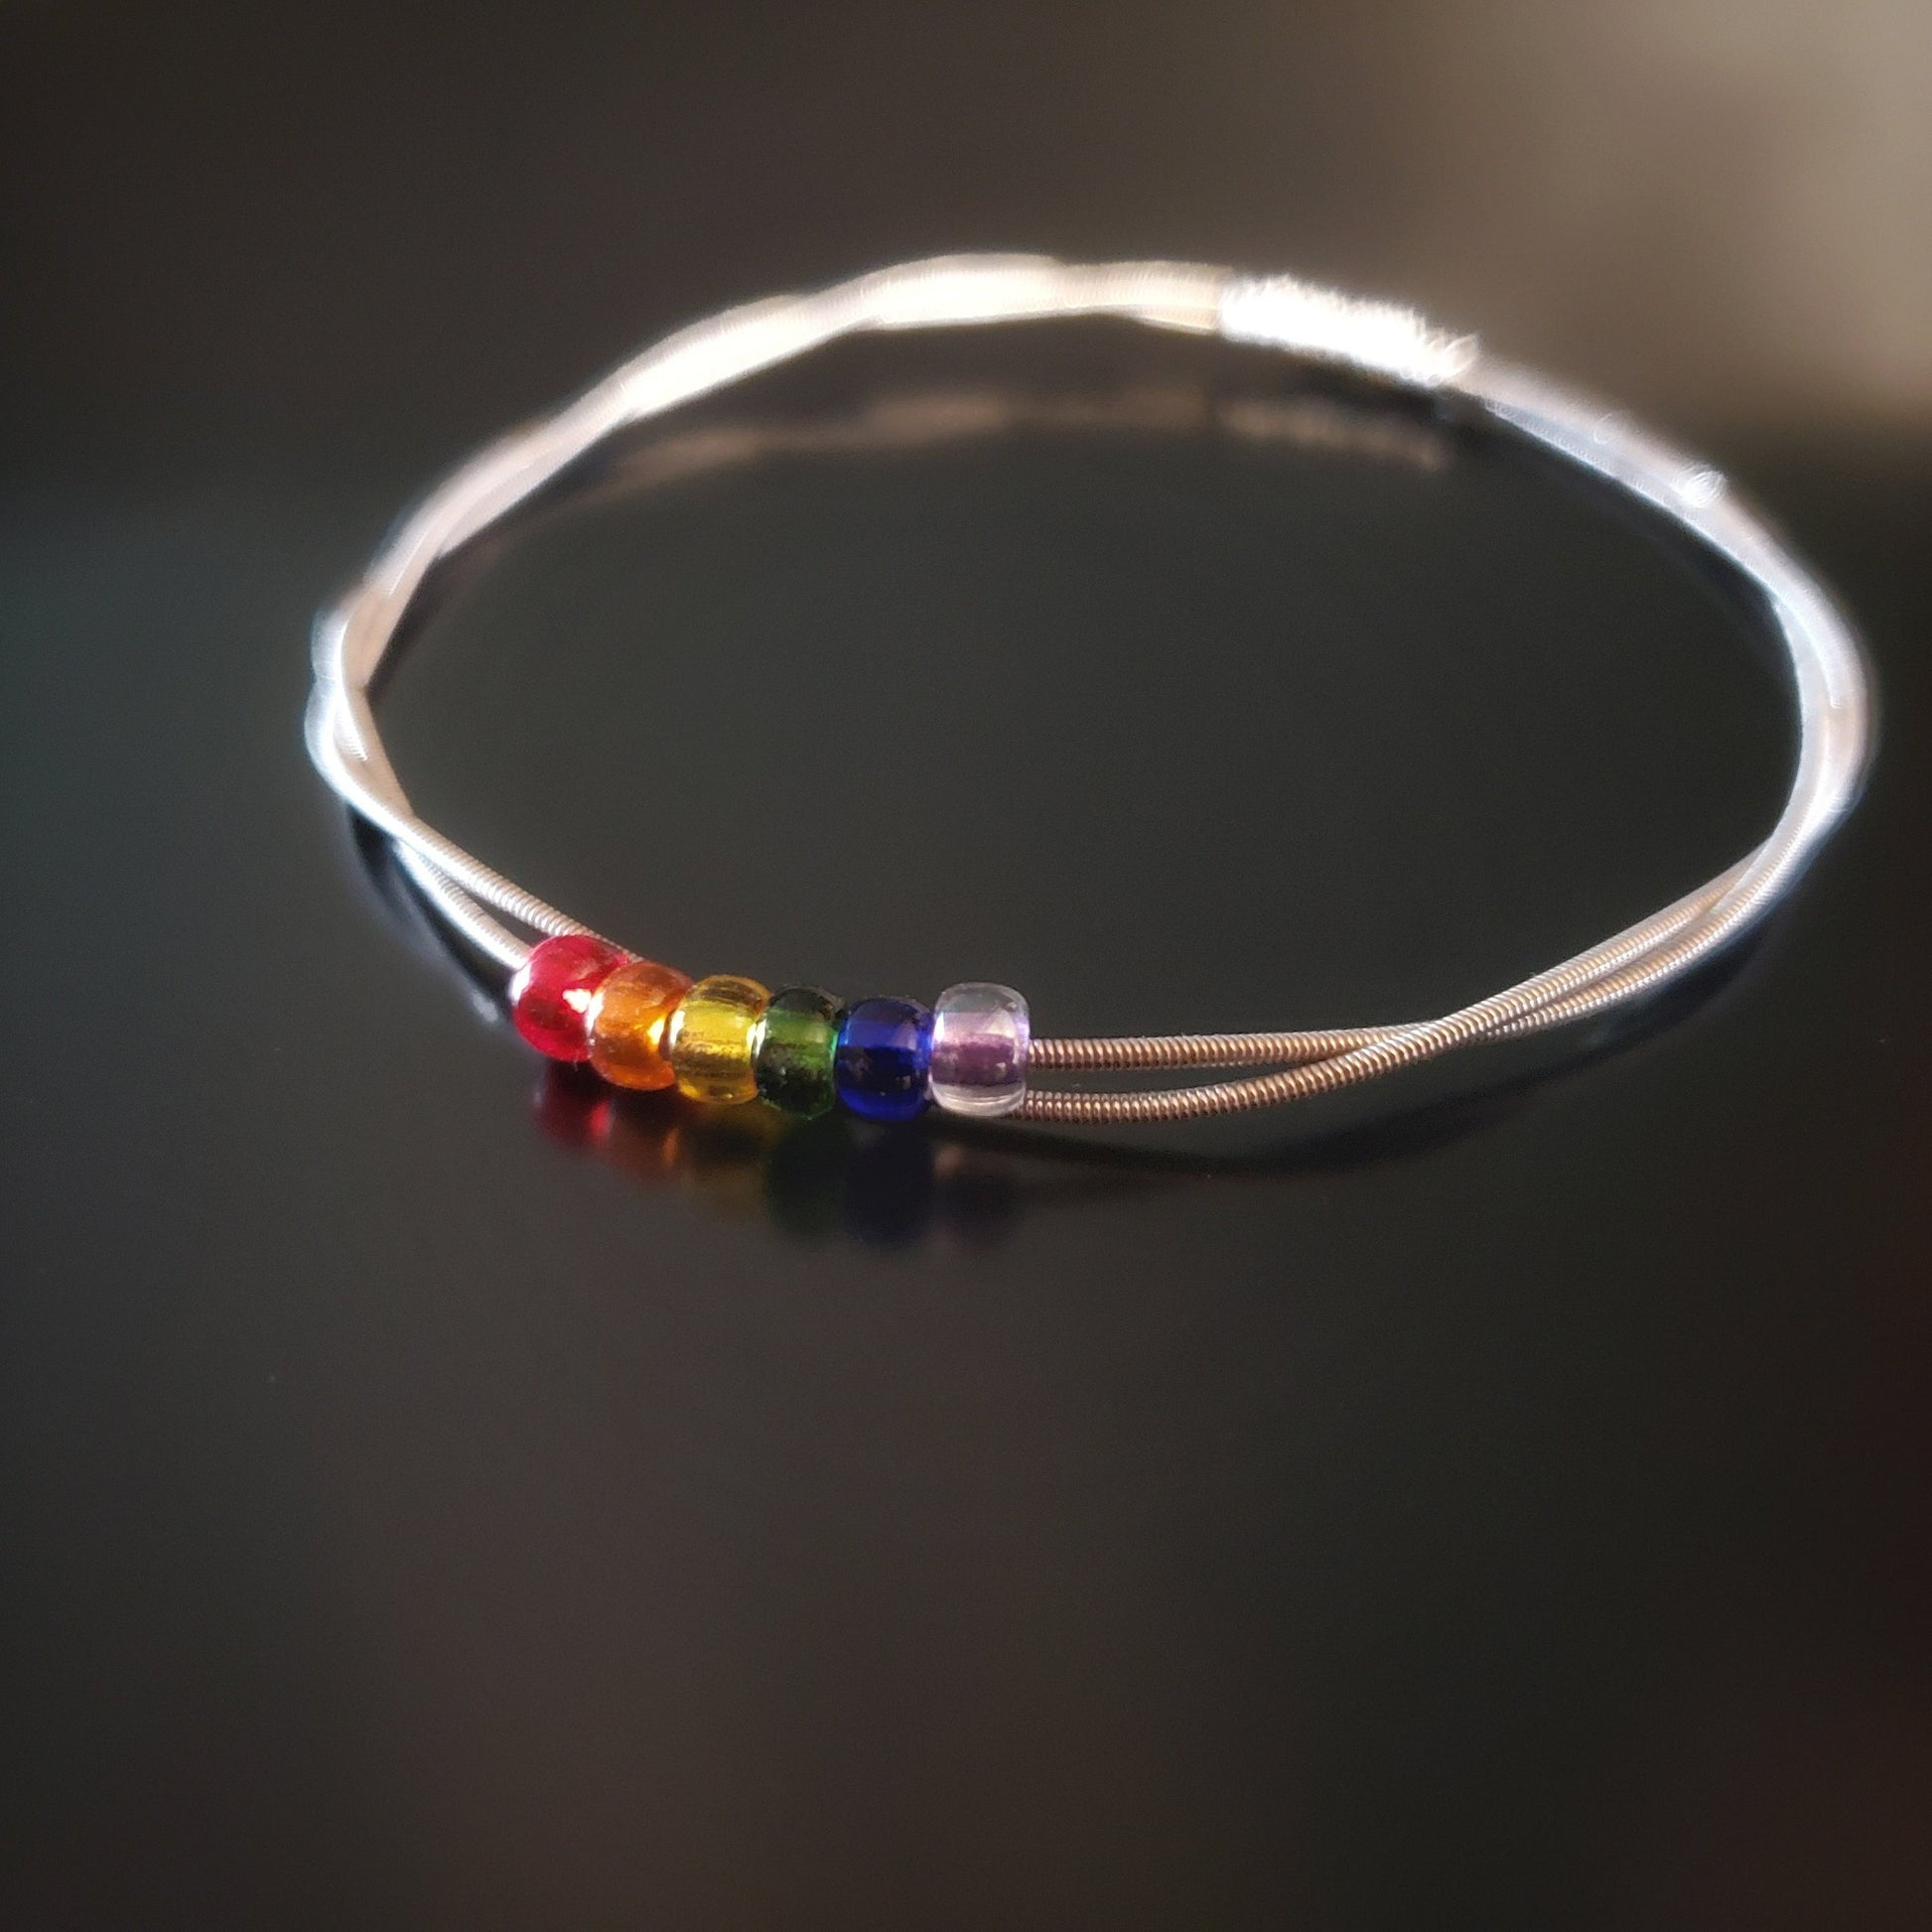 bangle style bracelet made from an upcycled guitar string - 6 glass beads represent the colours of the LGBTQ flag (red, orange, yellow, green, blue and purple)